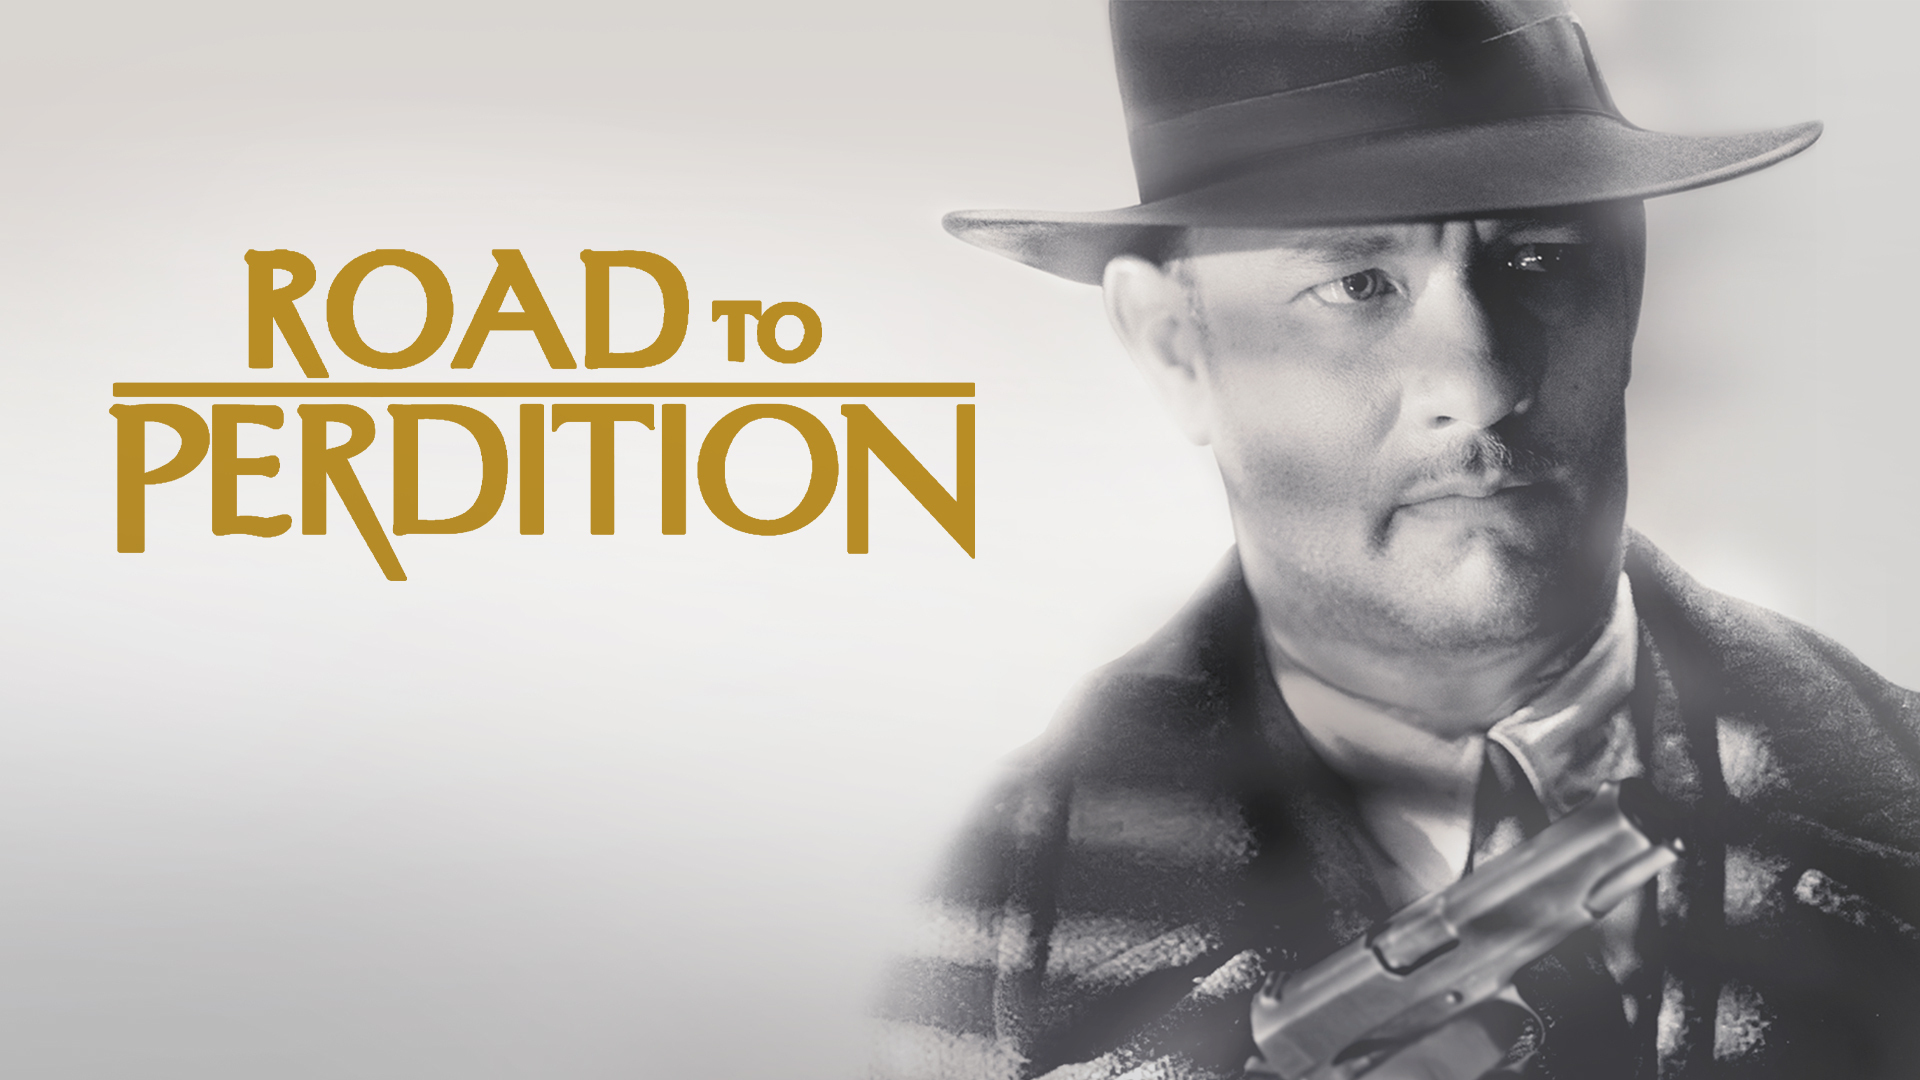 Watch Road to Perdition now on Paramount Plus